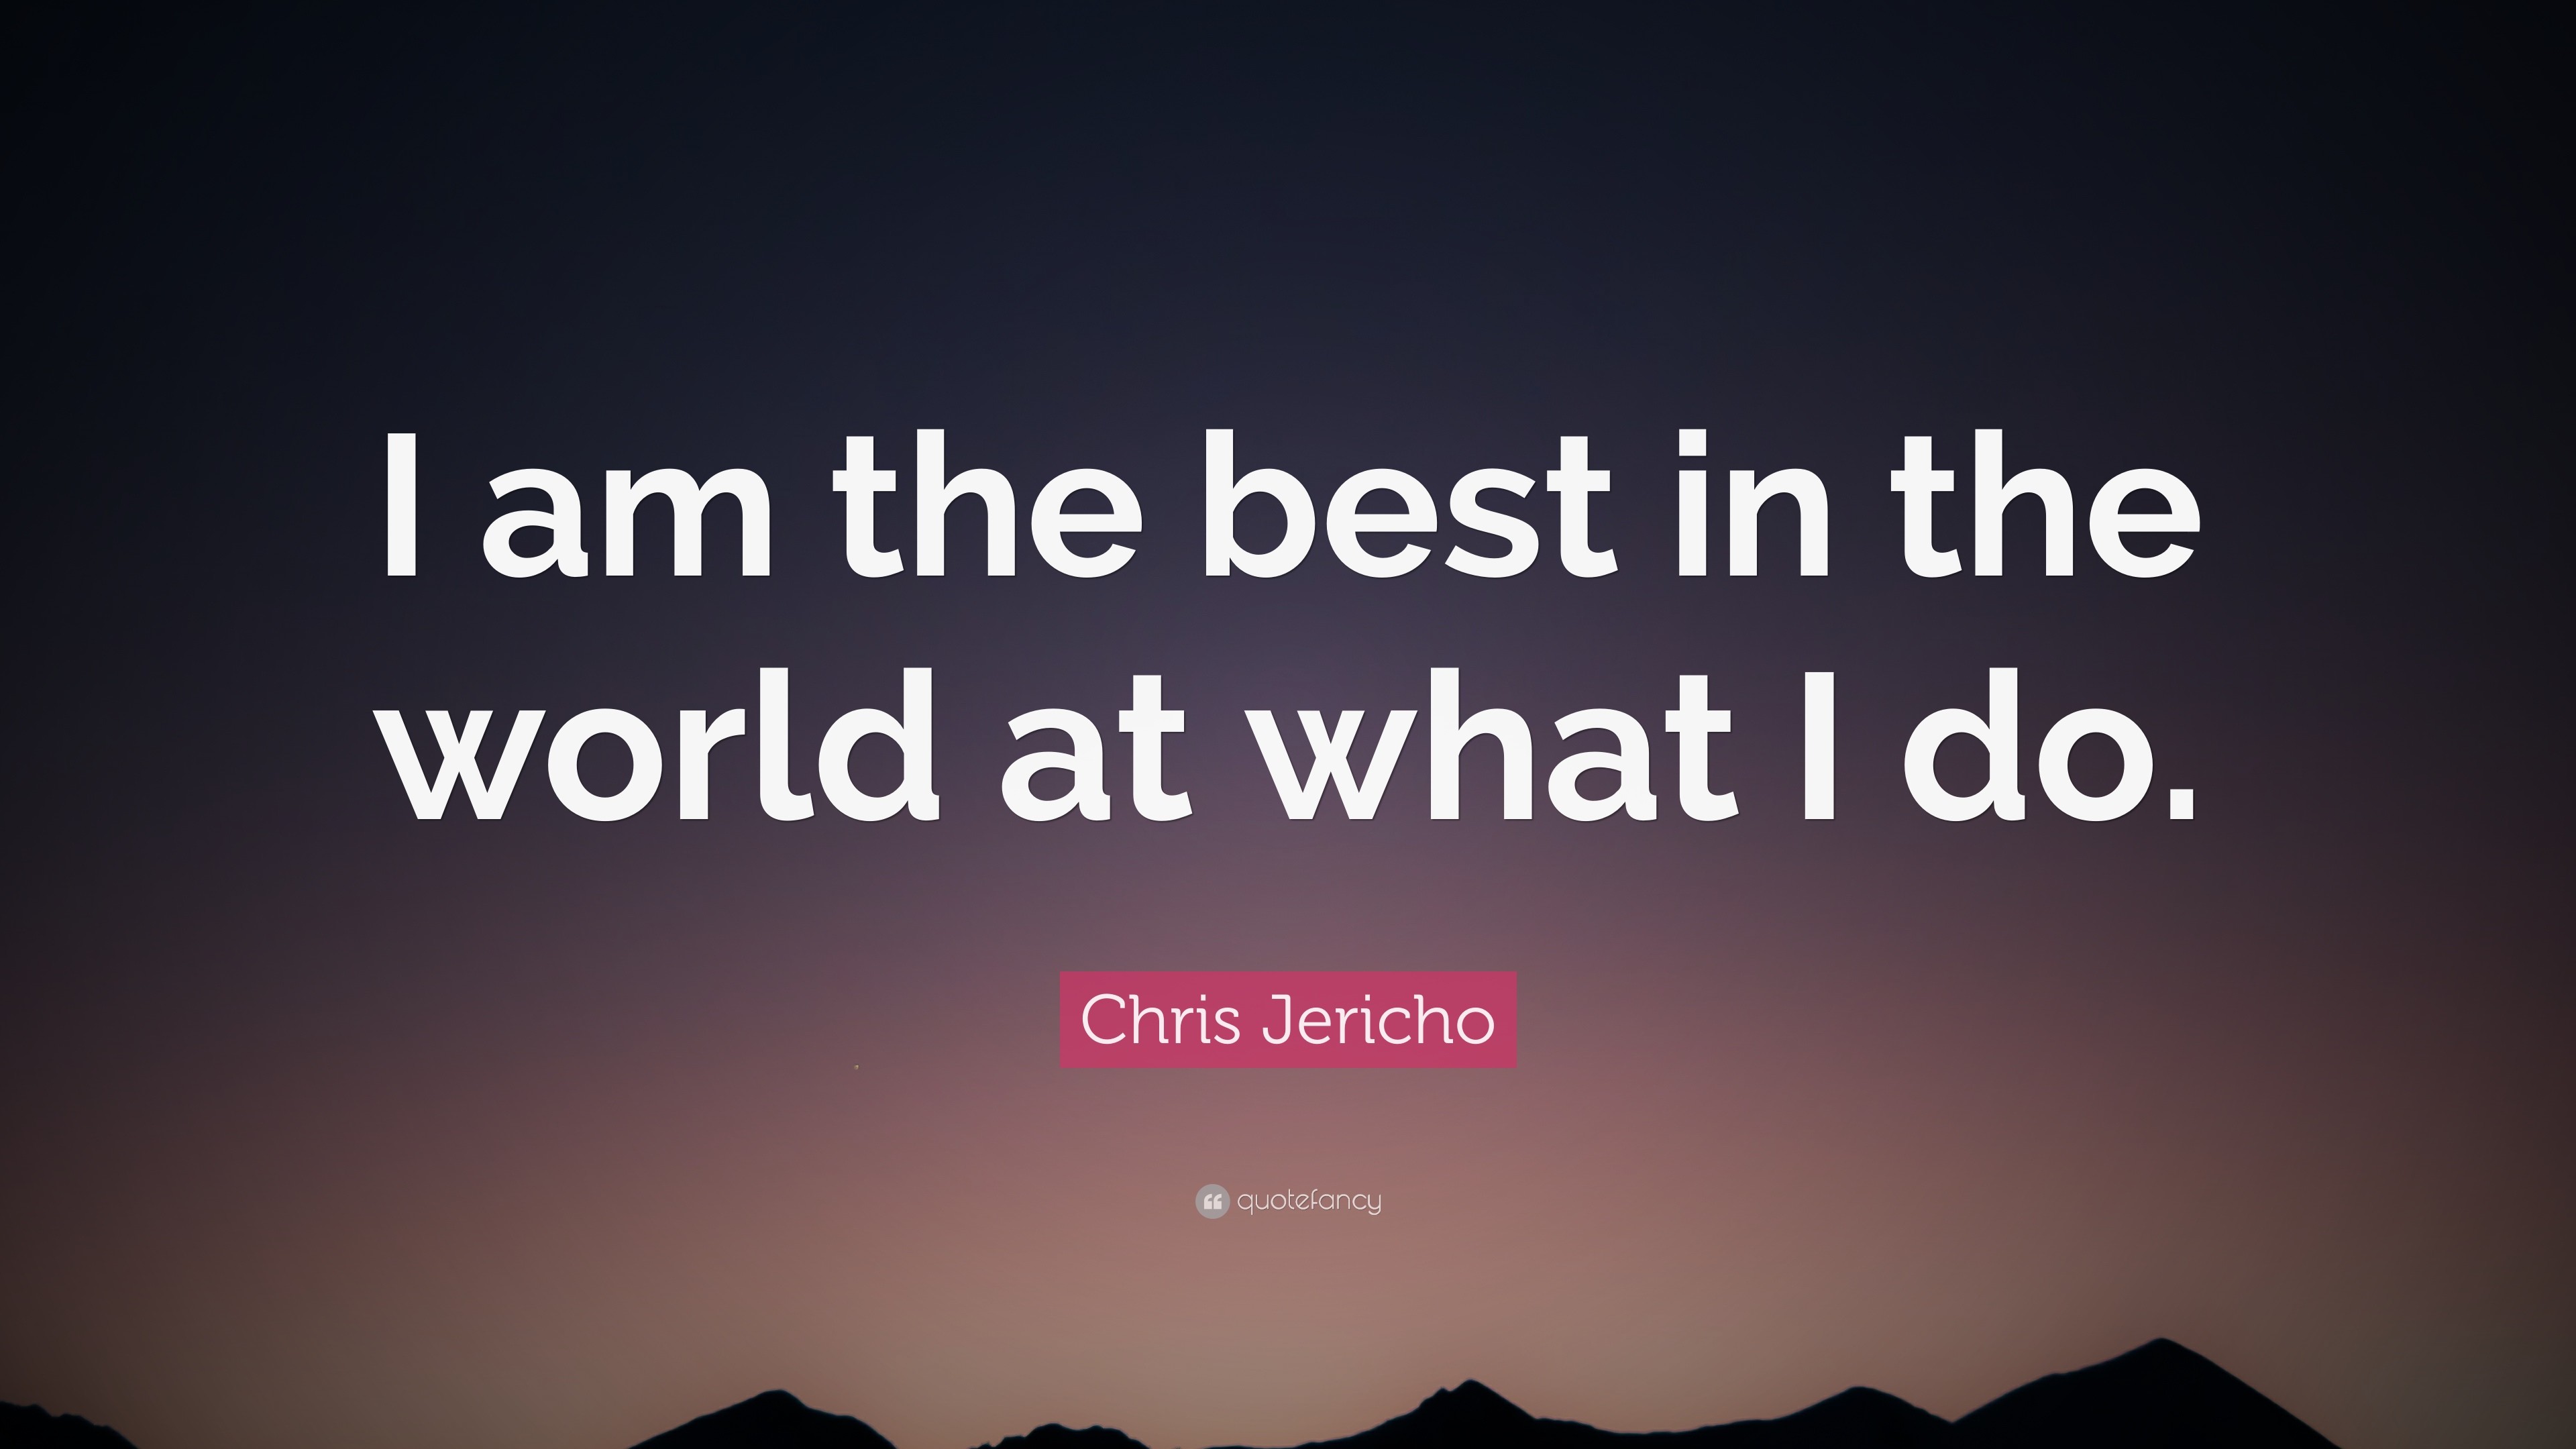 3840x2160 Chris Jericho Quote: “I am the best in the world at what I do